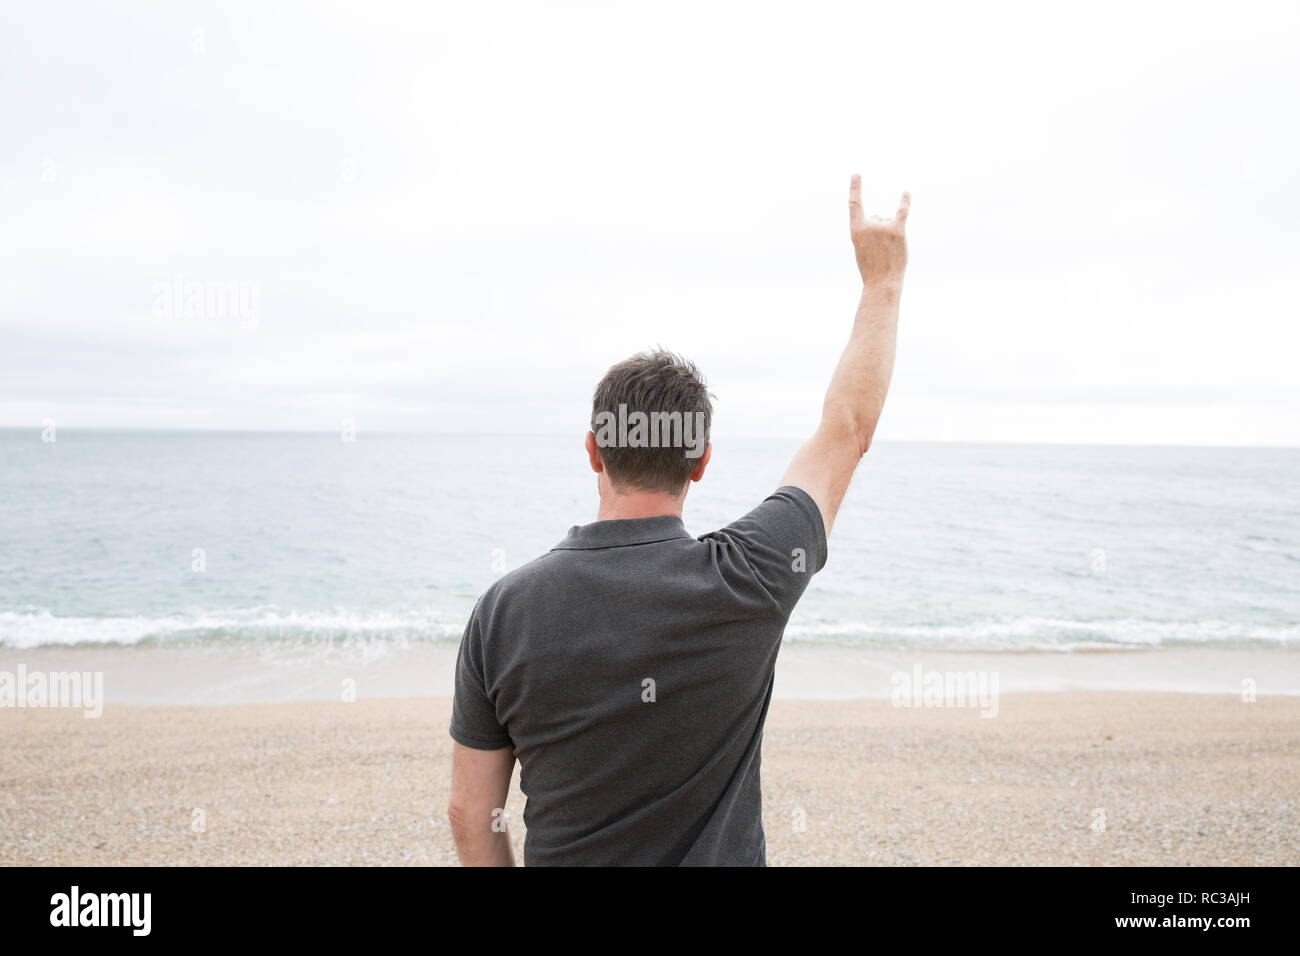 A rear view of a strong young man raising his arm in teh air and giving a devil horn gesture whilst facing the ocean in a symbol of hope and defiance  Stock Photo